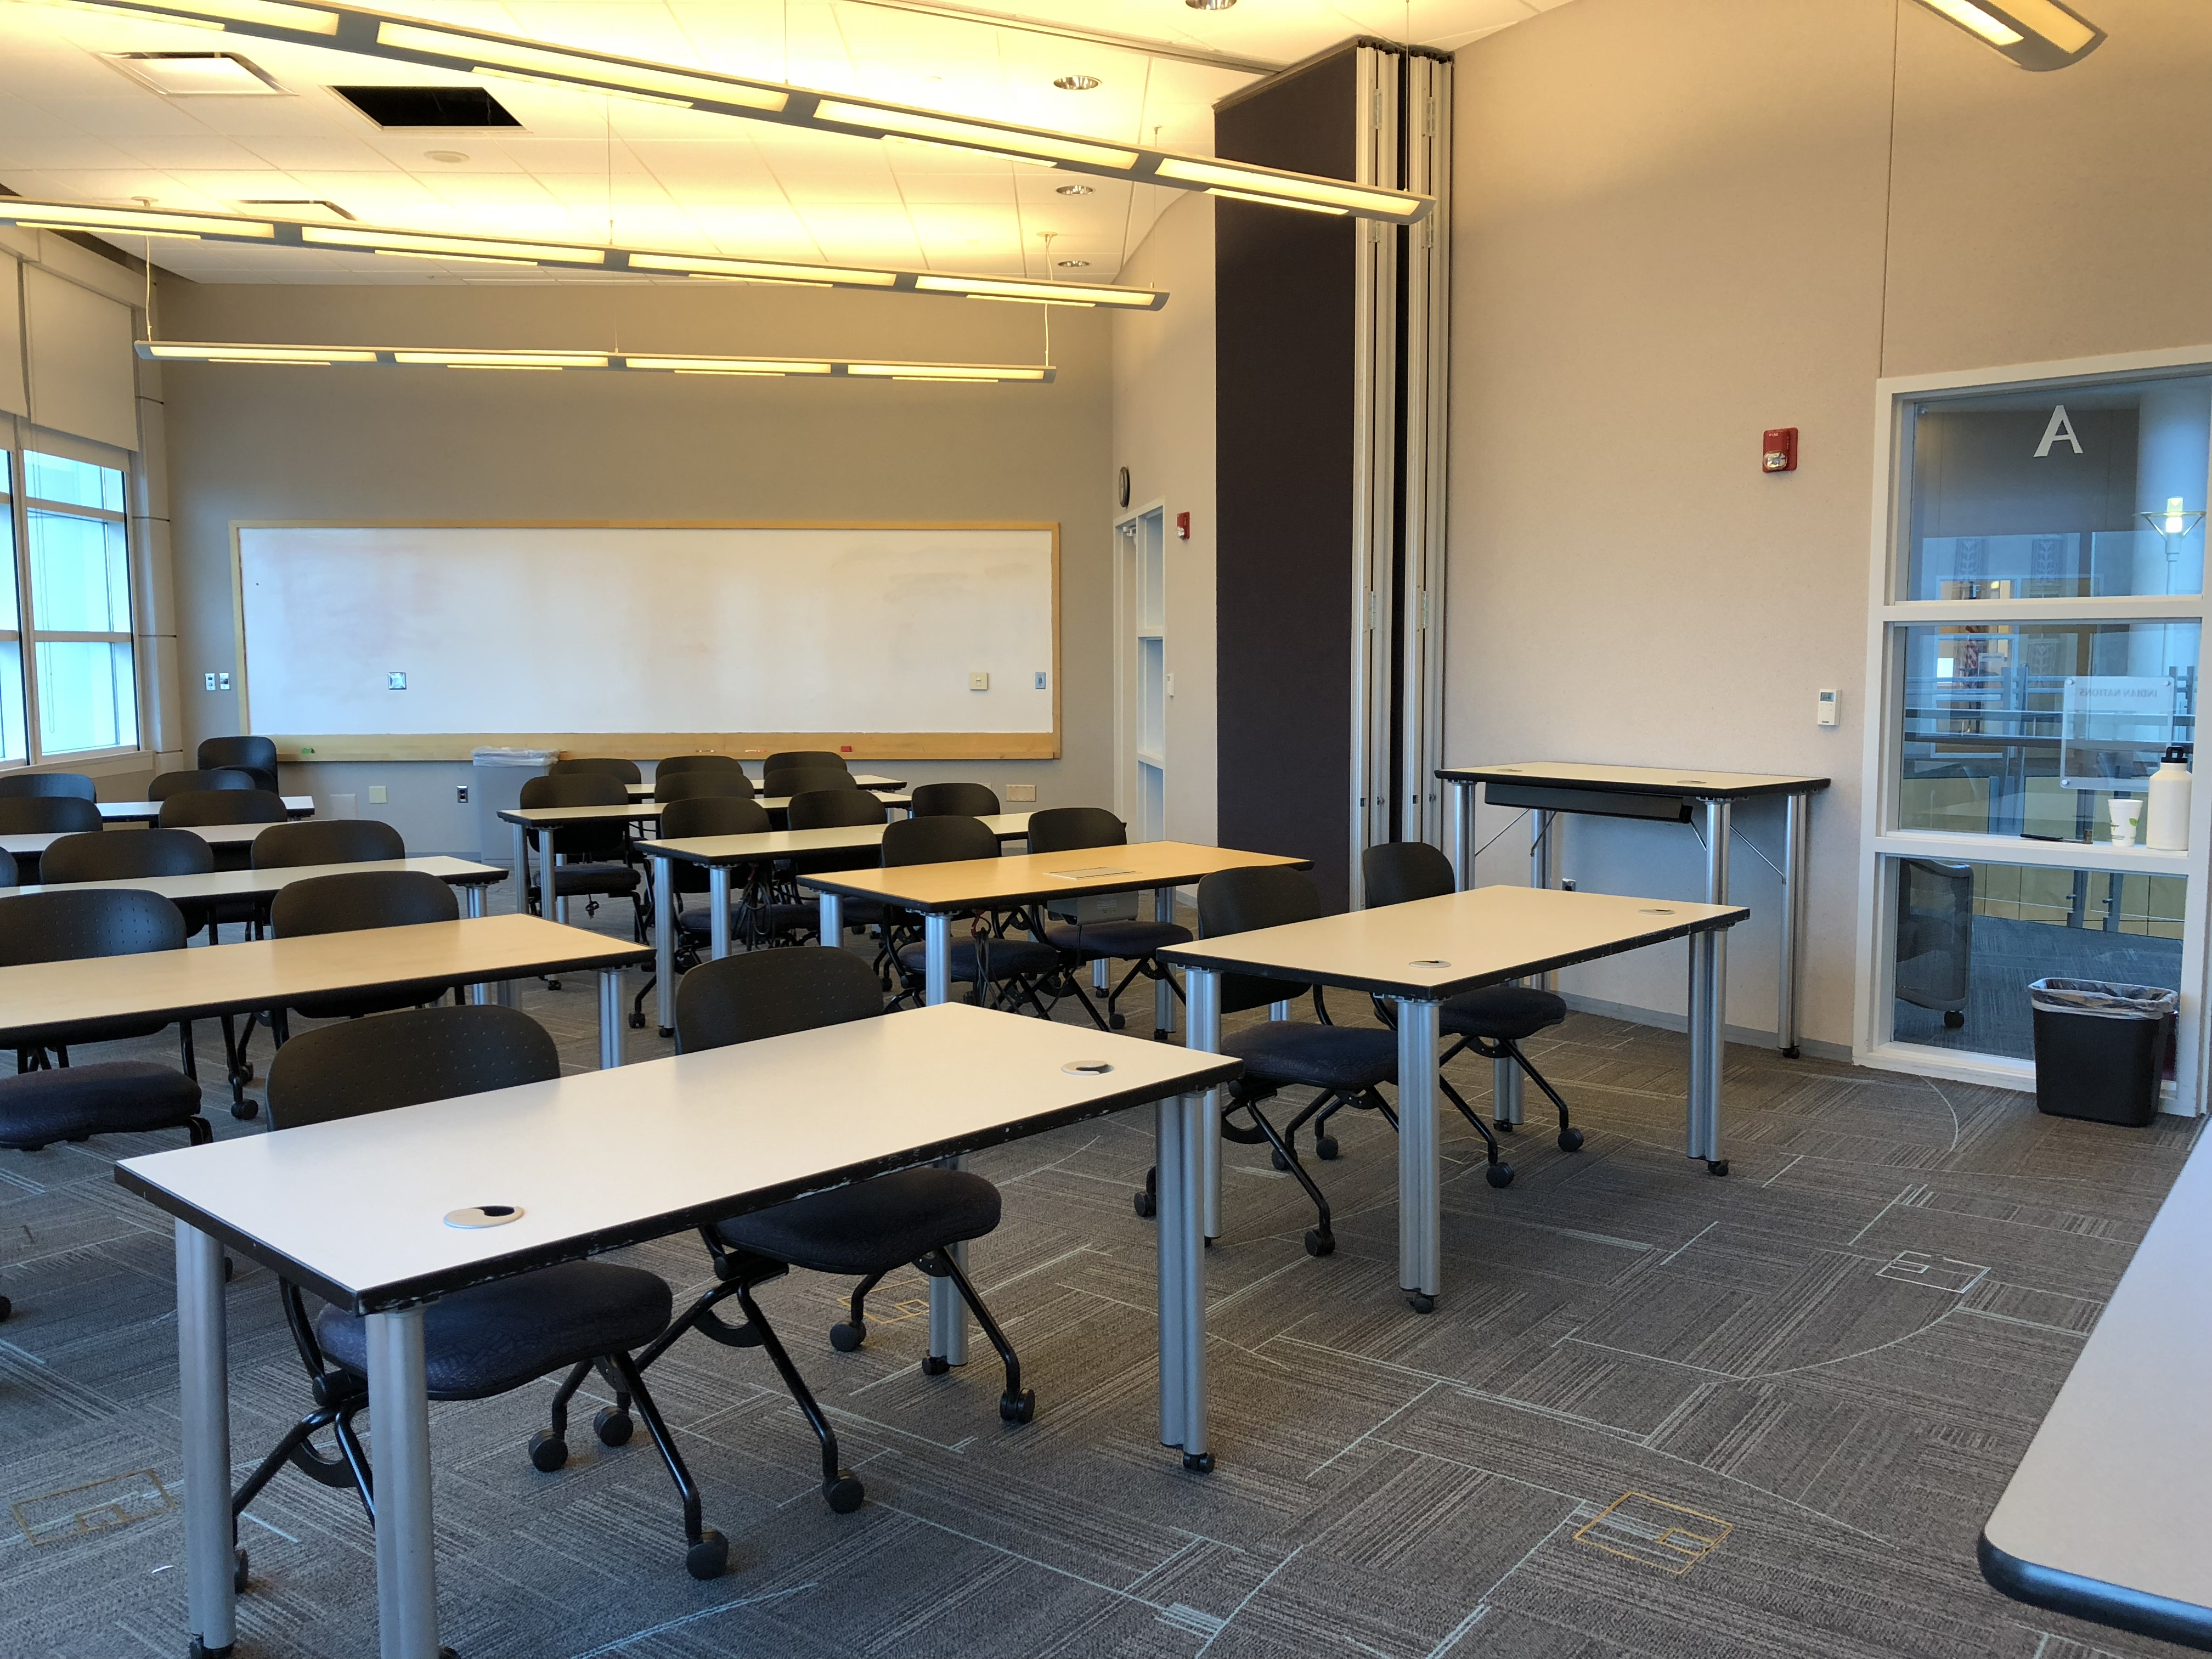 Classroom EF at the Downtown Library with classroom-style setup